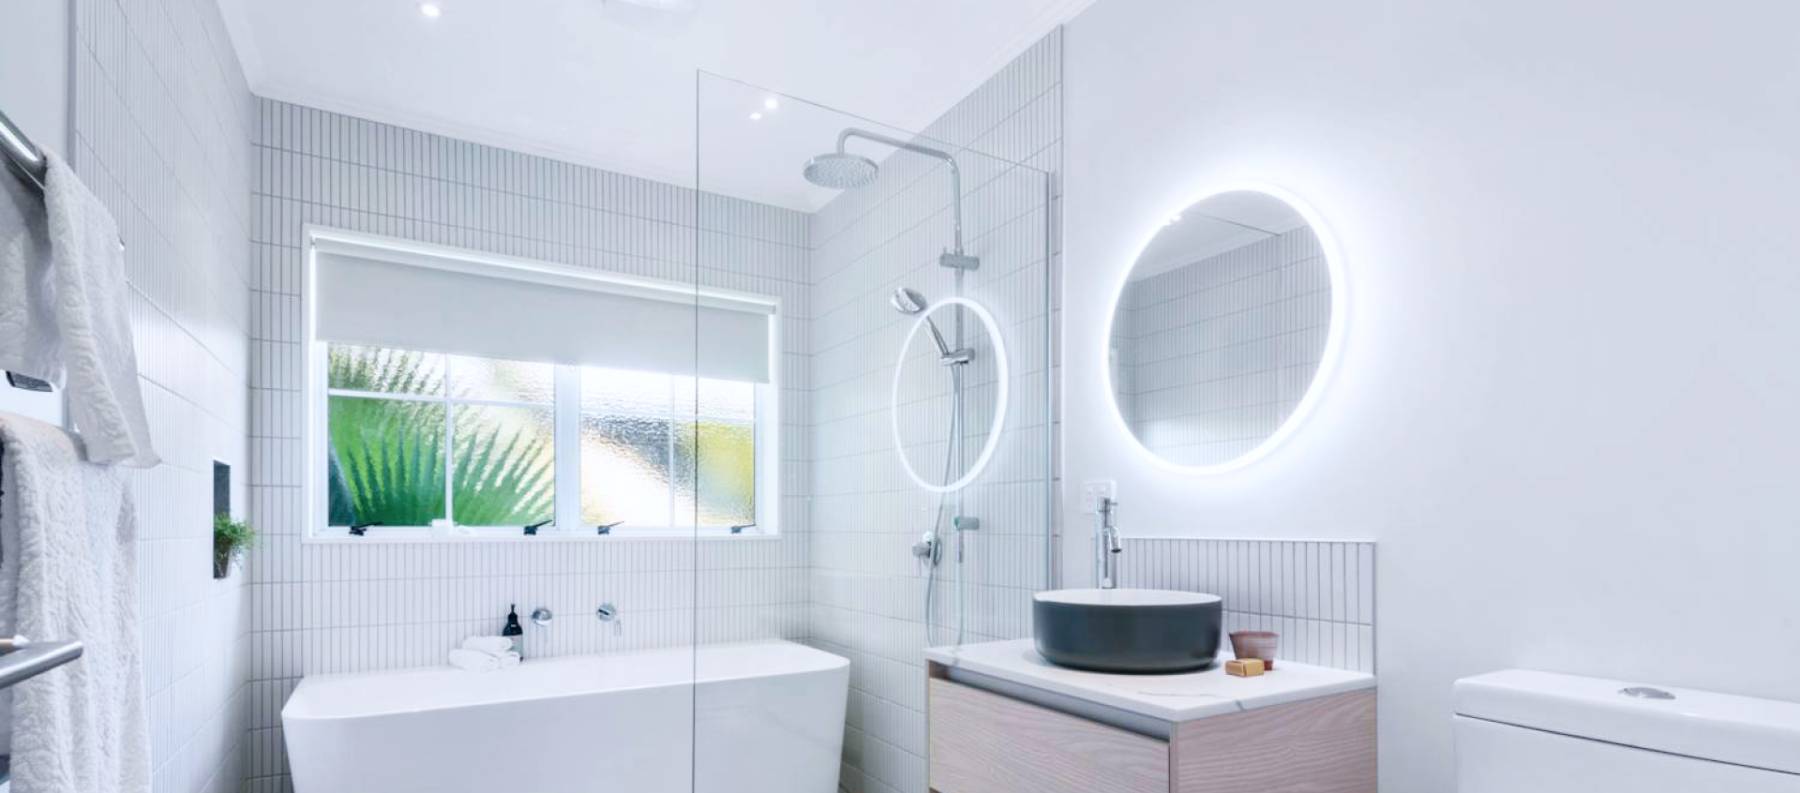 Renovated bathroom with tiled bath and separate rain shower area, glass screen, vanity and circular mirror with LED light around